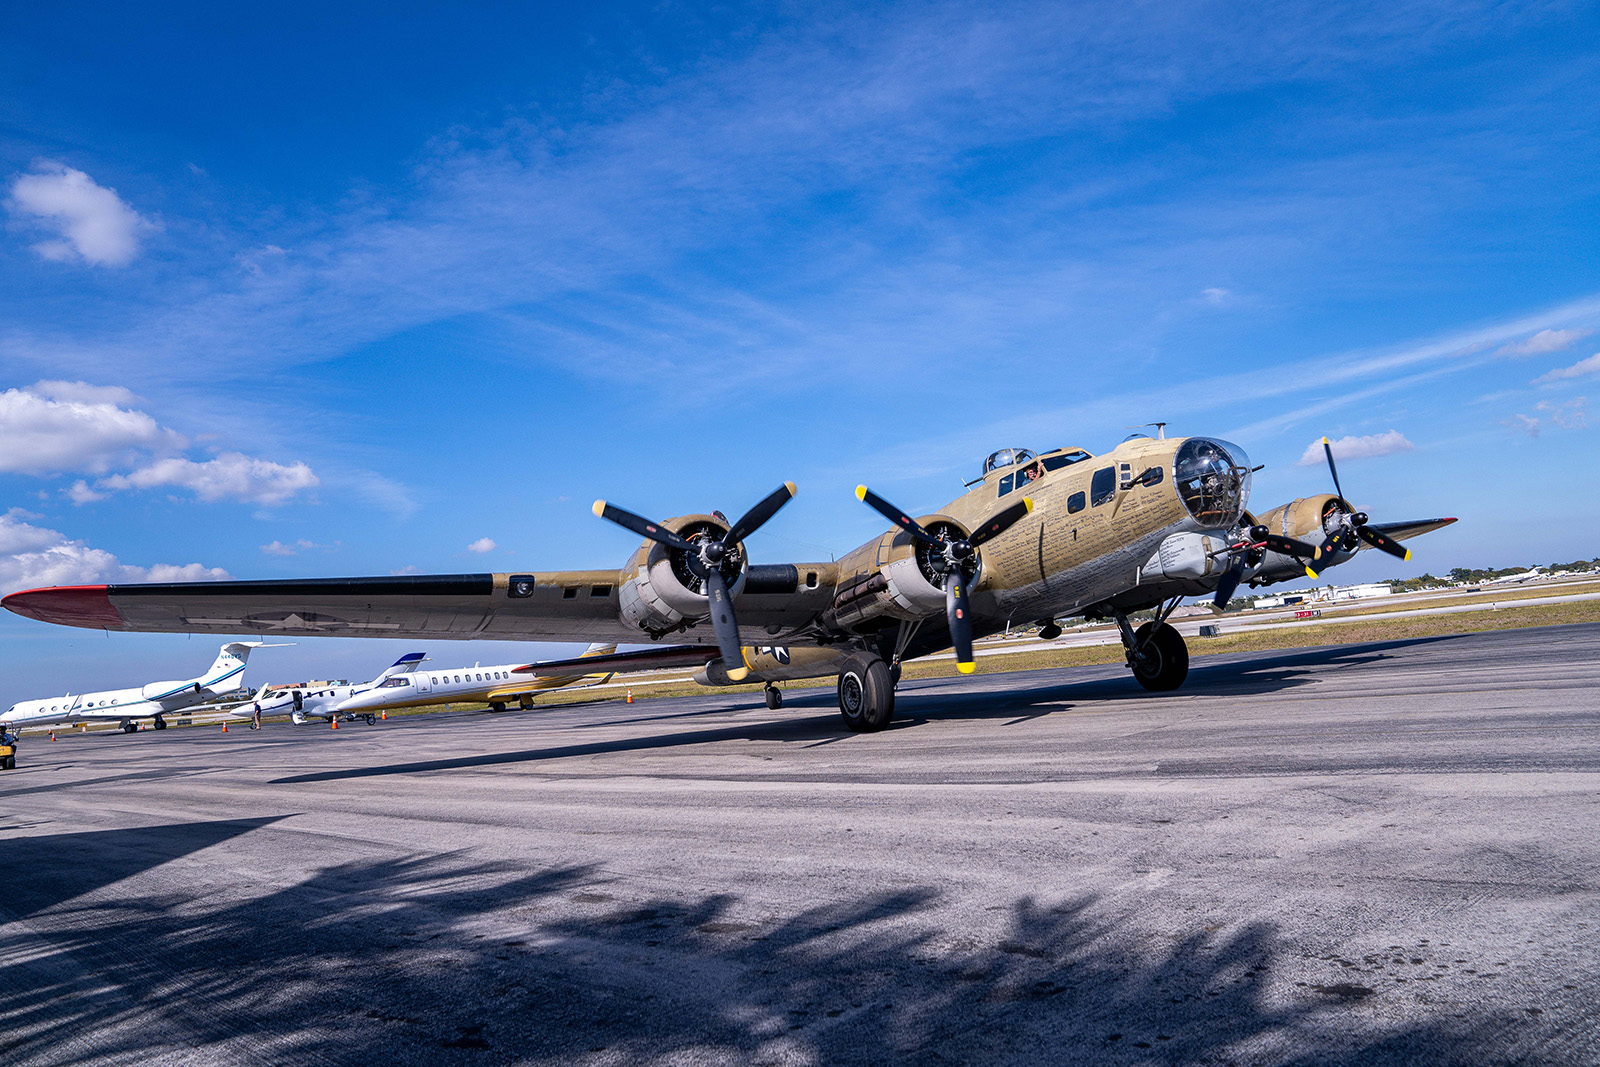 PHOTO: A B-17 bomber aircraft from World War II arrives at Fort Lauderdale Executive Airport in Fla., Jan. 18, 2019.